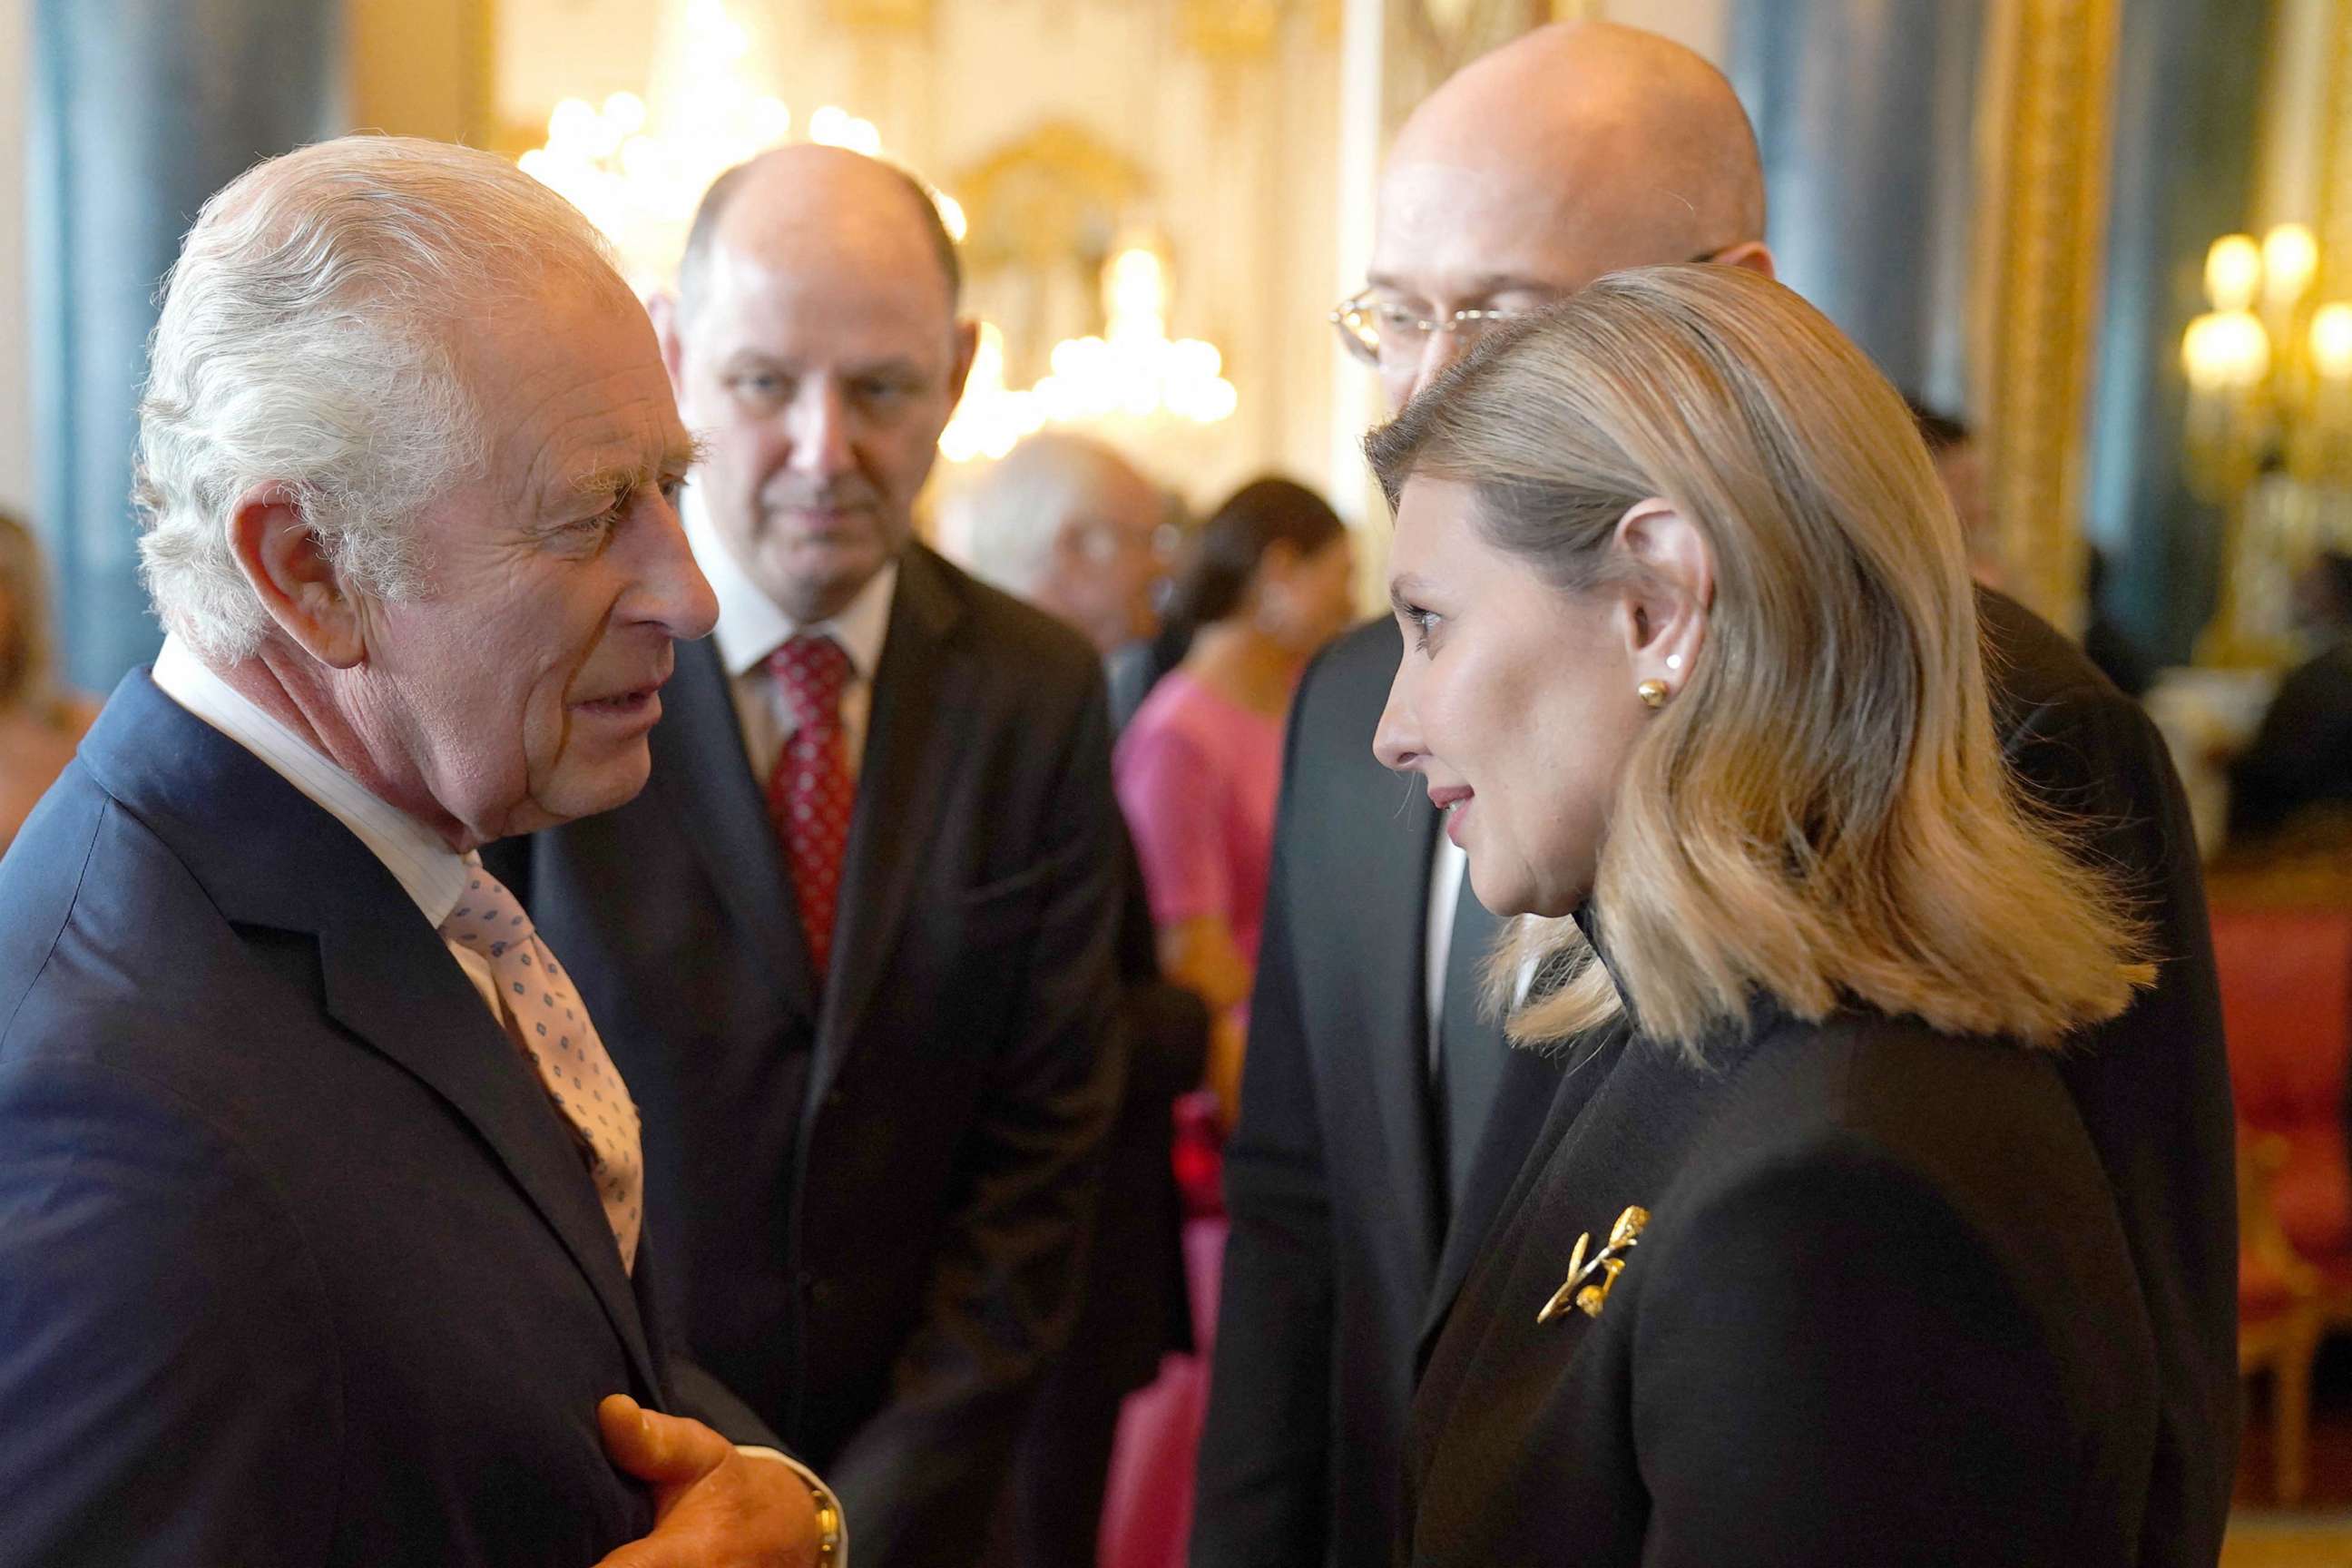 PHOTO: Britain's King Charles III speaks with Ukraine's First Lady Olena Zelenska and Ukraine's Prime Minister Denys Shmyhal during a reception for overseas guests attending his coronation, at Buckingham Palace in central London, May 5, 2023.